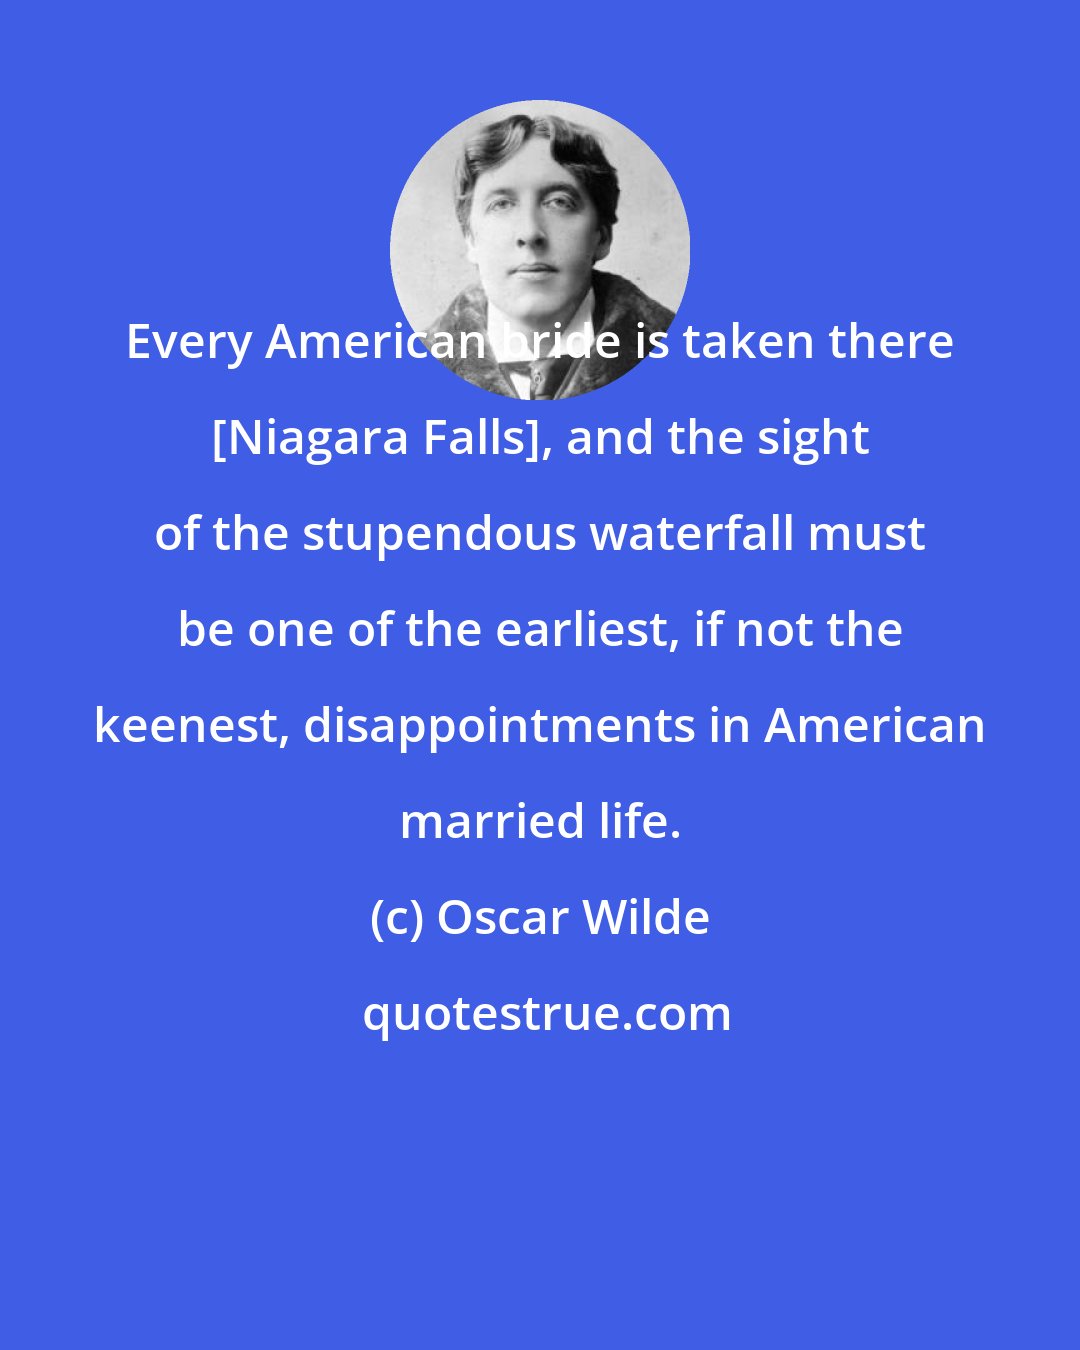 Oscar Wilde: Every American bride is taken there [Niagara Falls], and the sight of the stupendous waterfall must be one of the earliest, if not the keenest, disappointments in American married life.